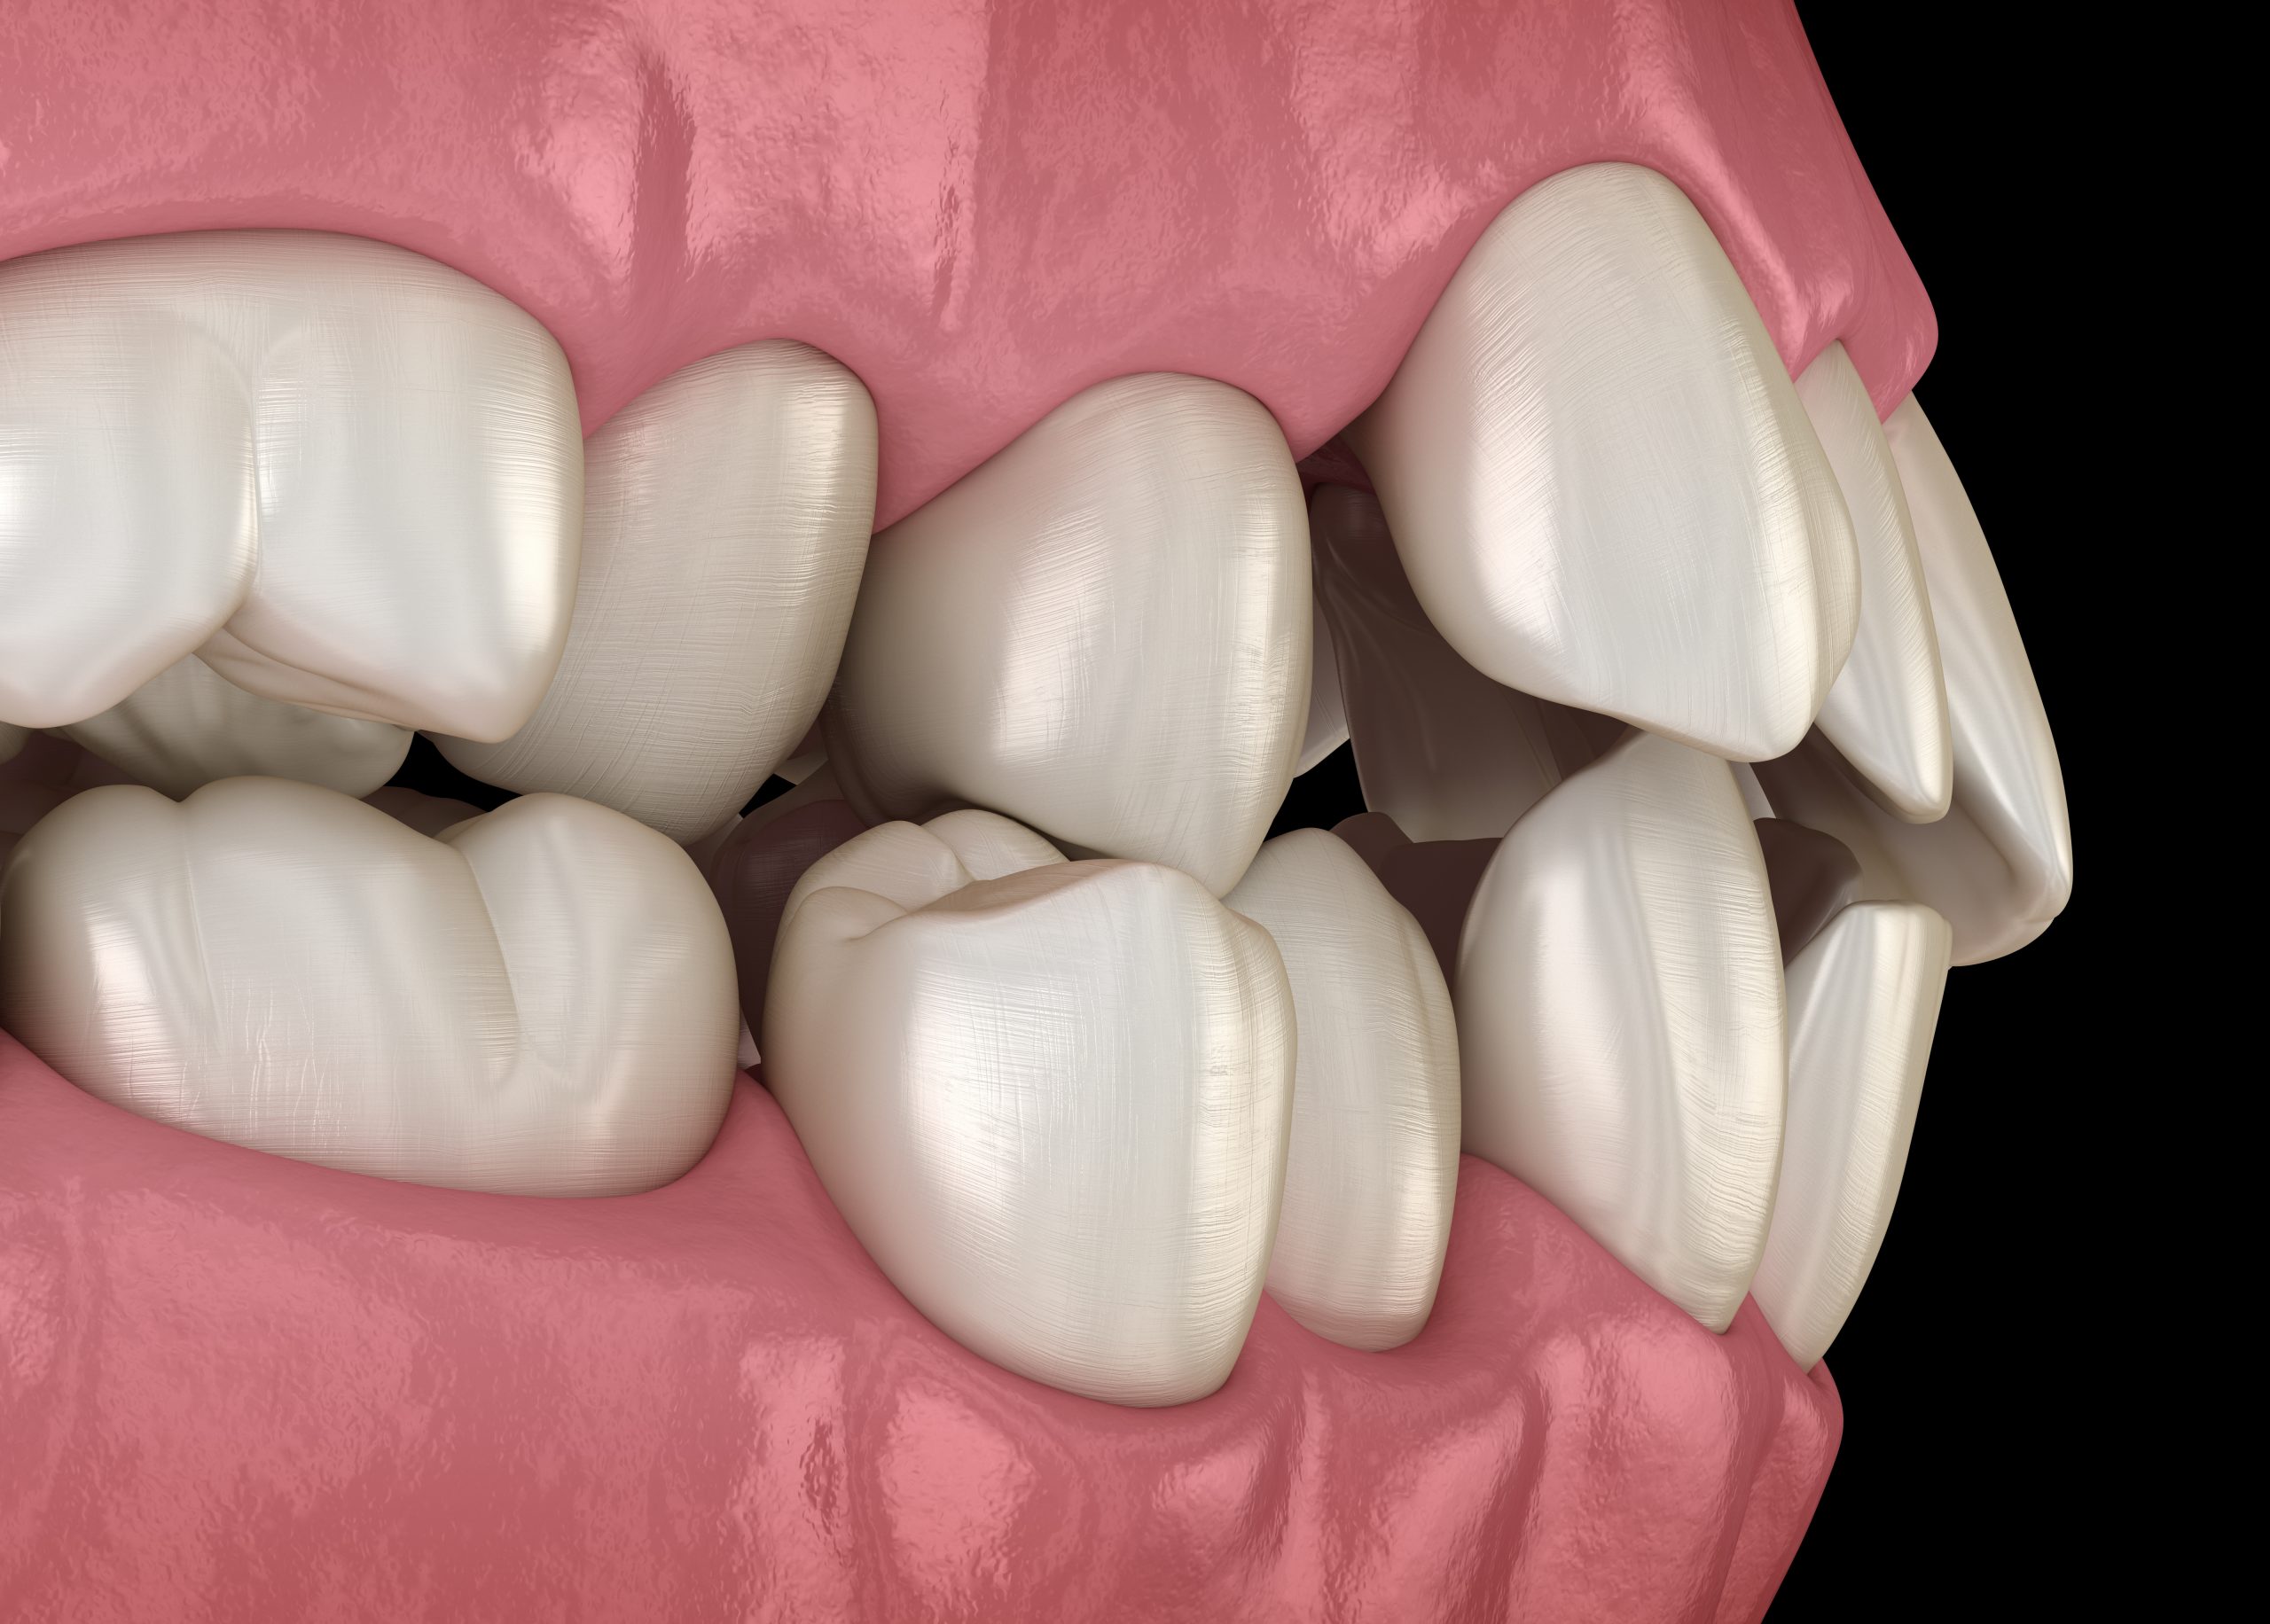 Abnormal teeth position, orthodontic concept. Medically accurate tooth 3D illustration